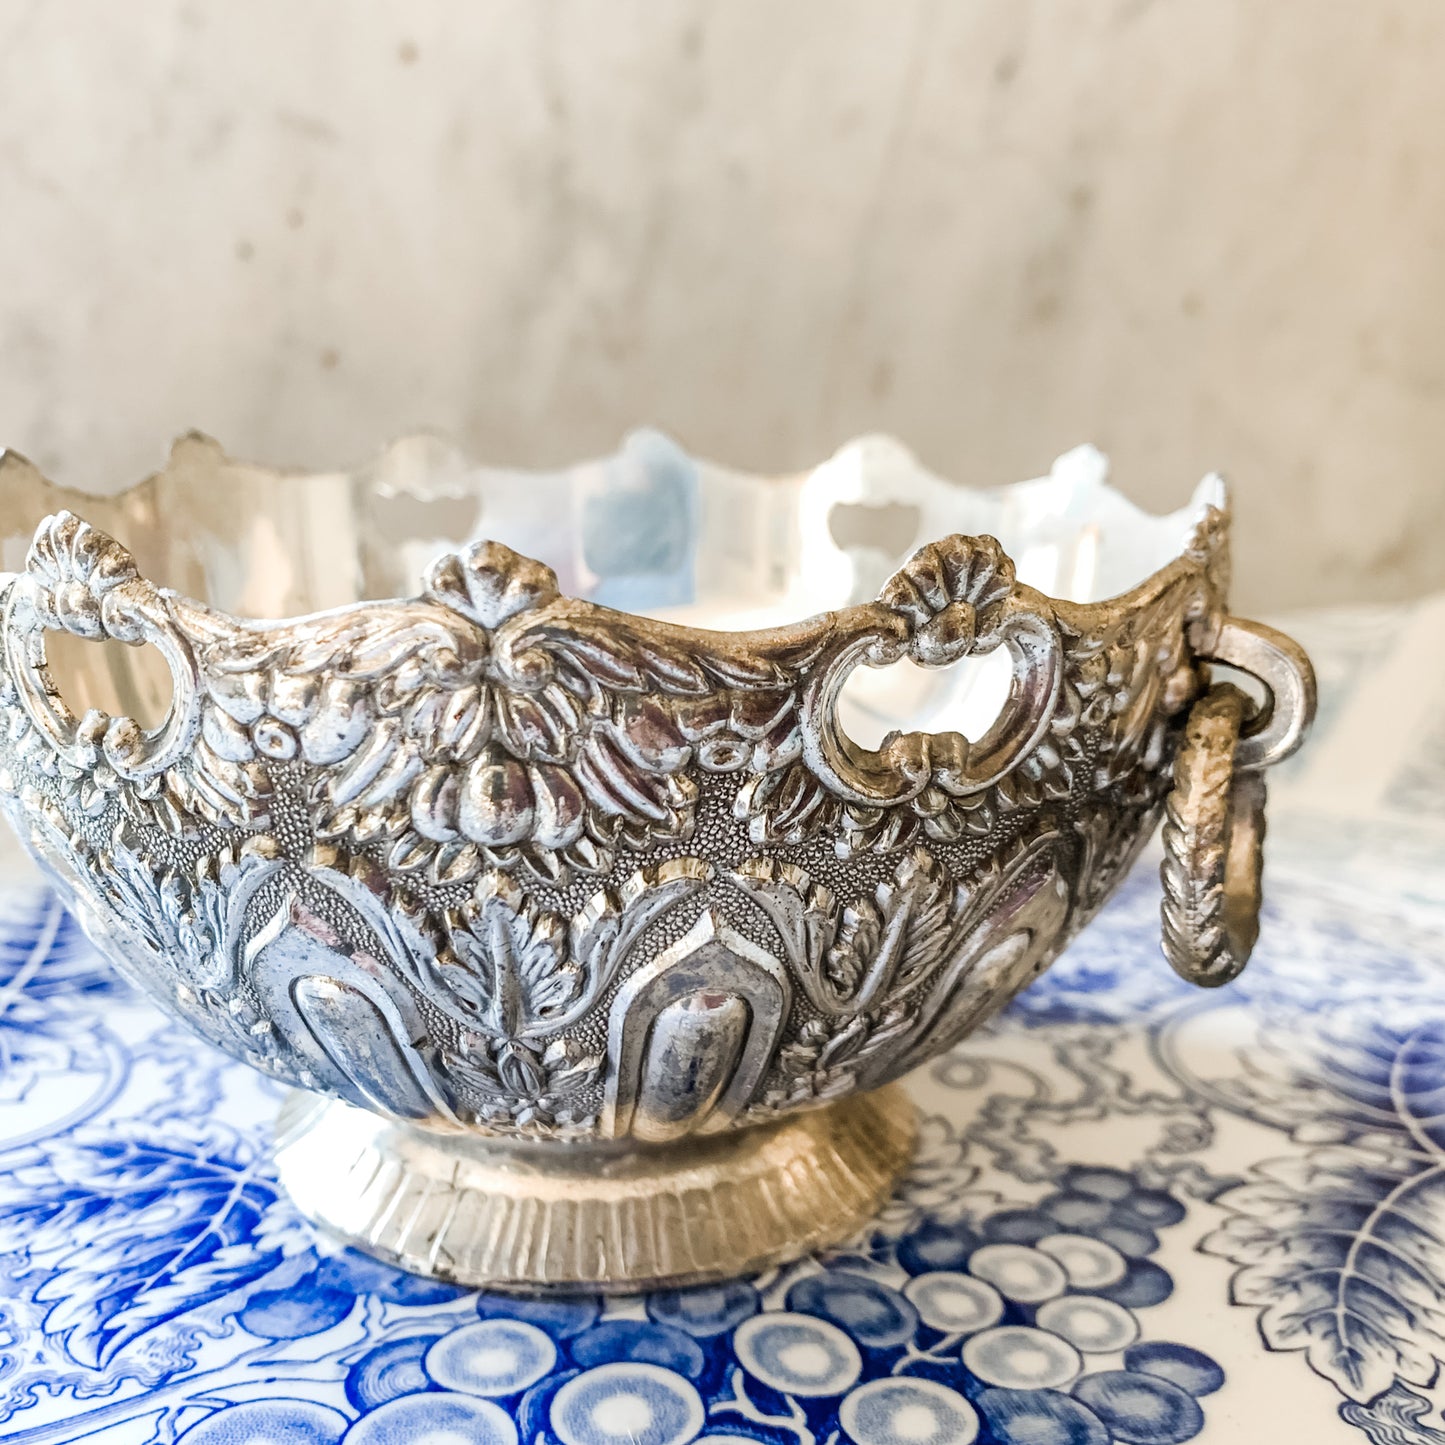 Antique Repousse Silver Bowl with Ring Handles